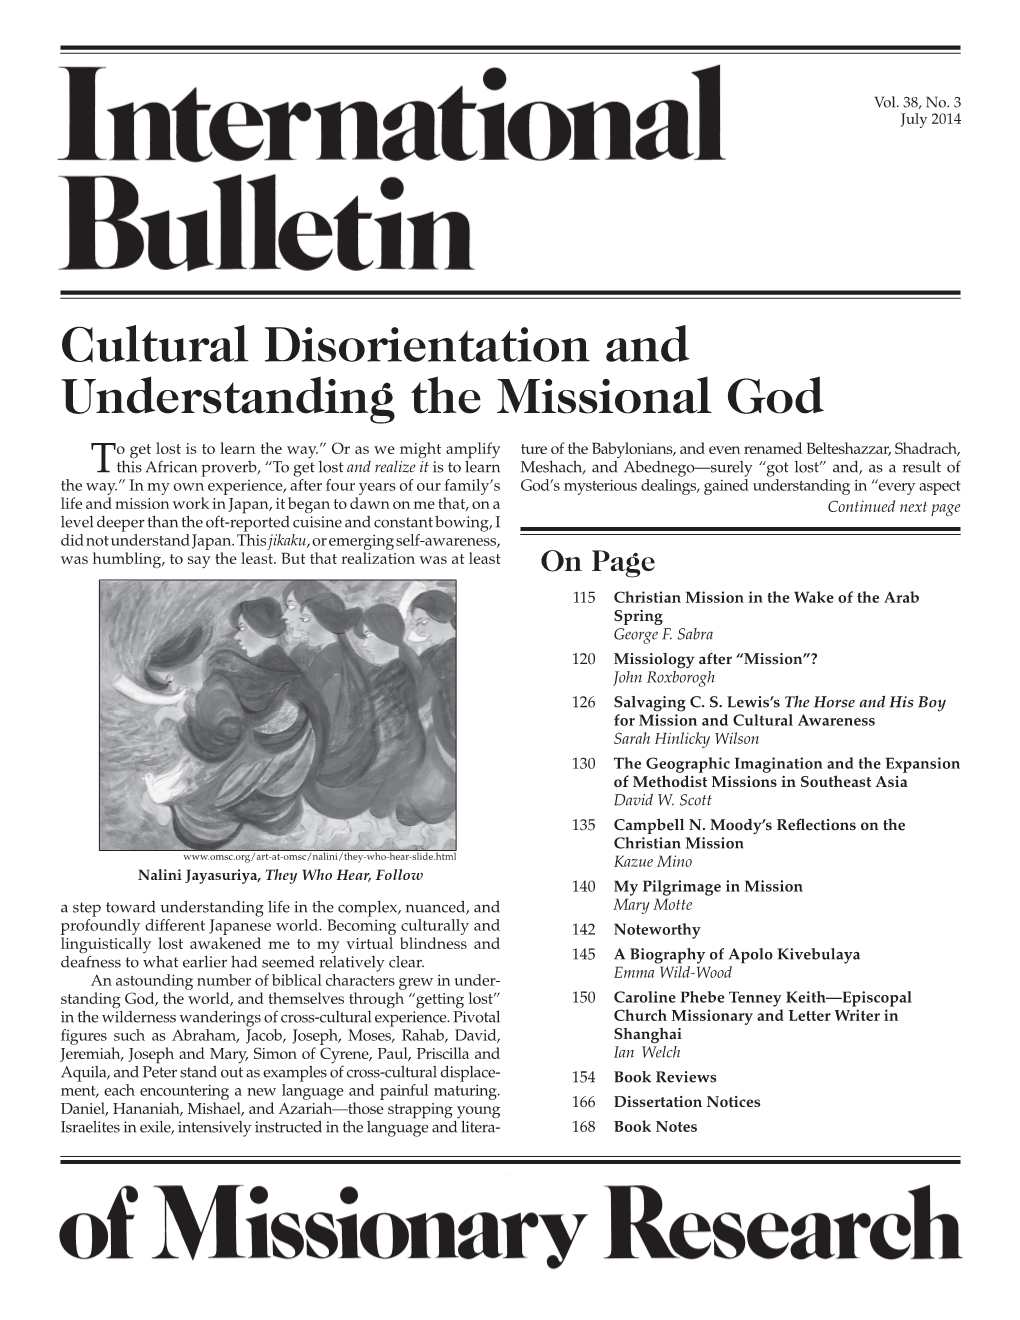 International Bulletin of Missionary Research Established 1950 by R